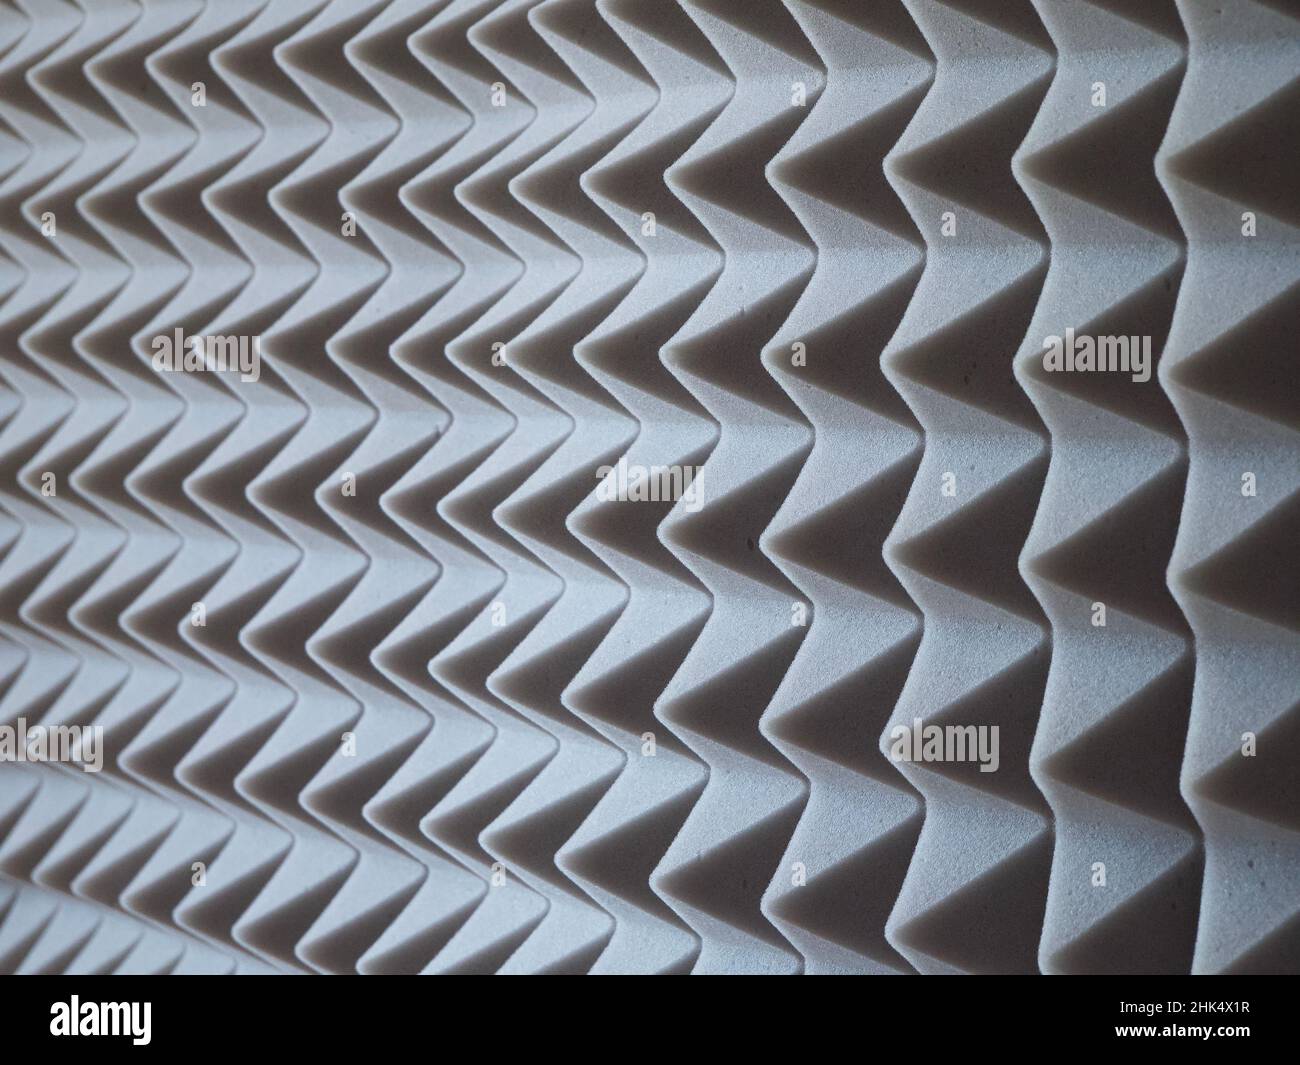 Grey acoustic foam rubber. Soundproof pyramids, full frame. Stock Photo